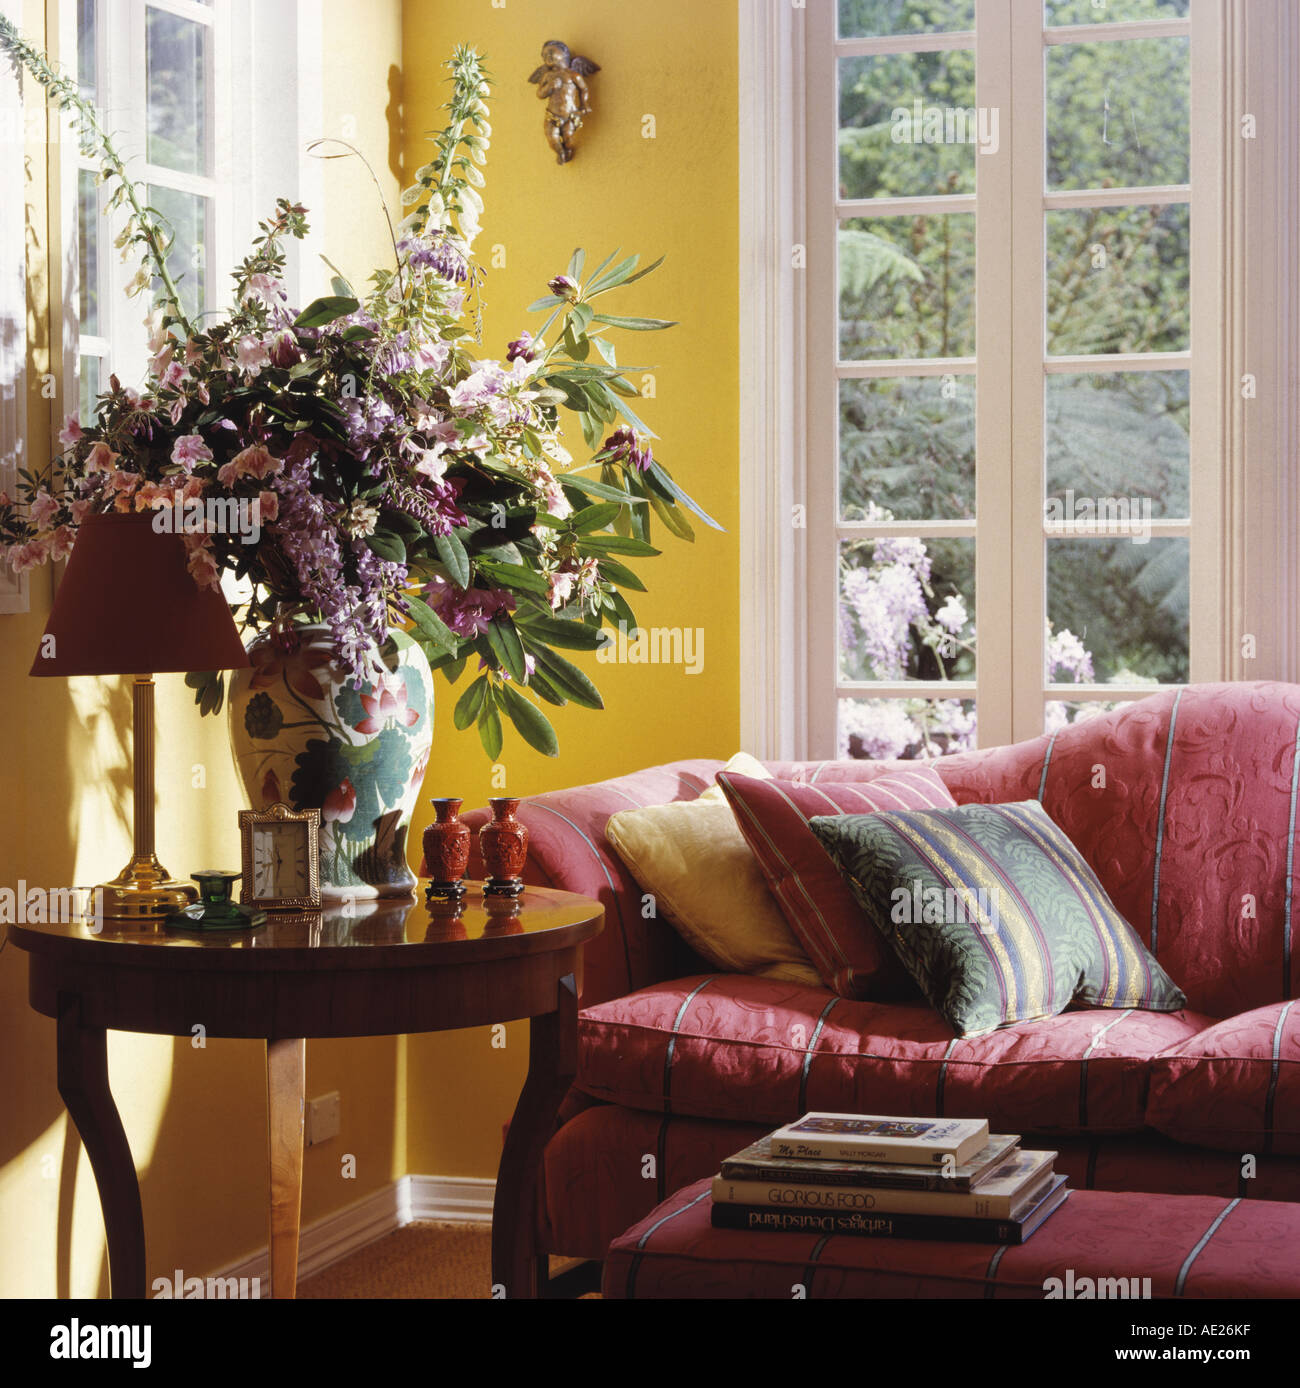 Vase of summer flowers on antique table beside pink sofa in front of French  windows in yellow living room Stock Photo - Alamy